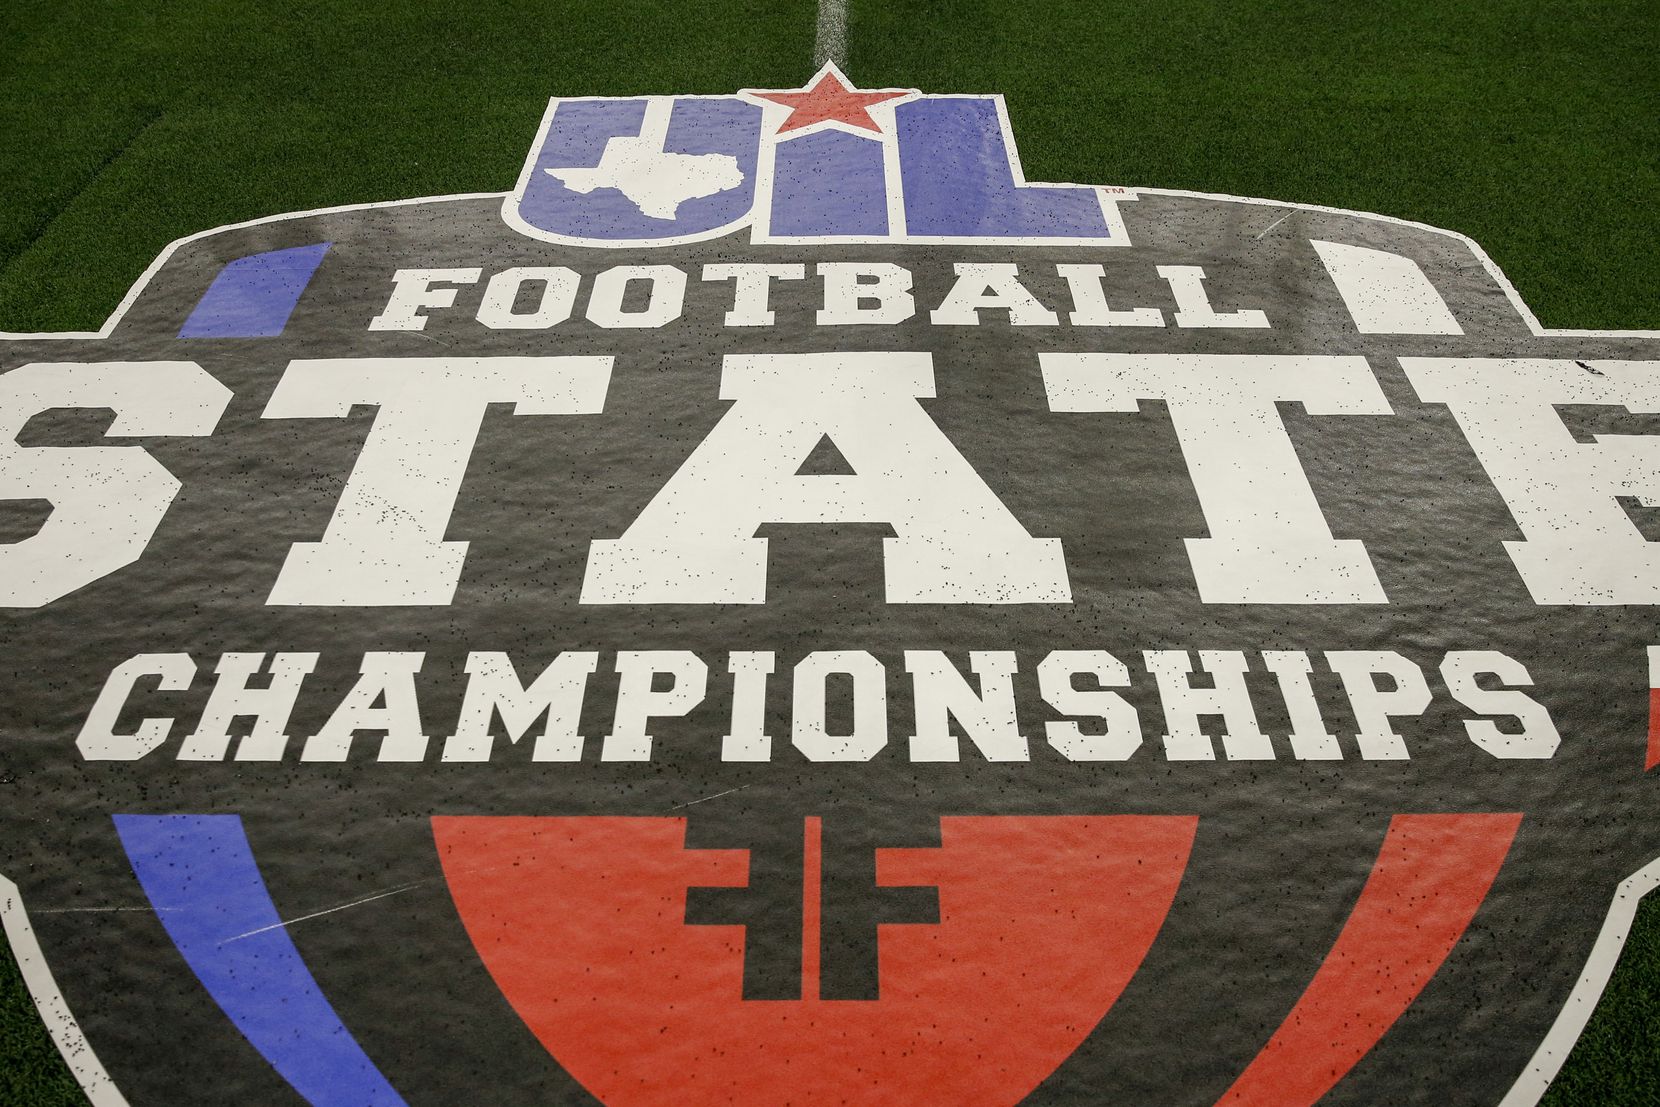 LISTEN: Houston Matters' Special Live Coverage of the Championship